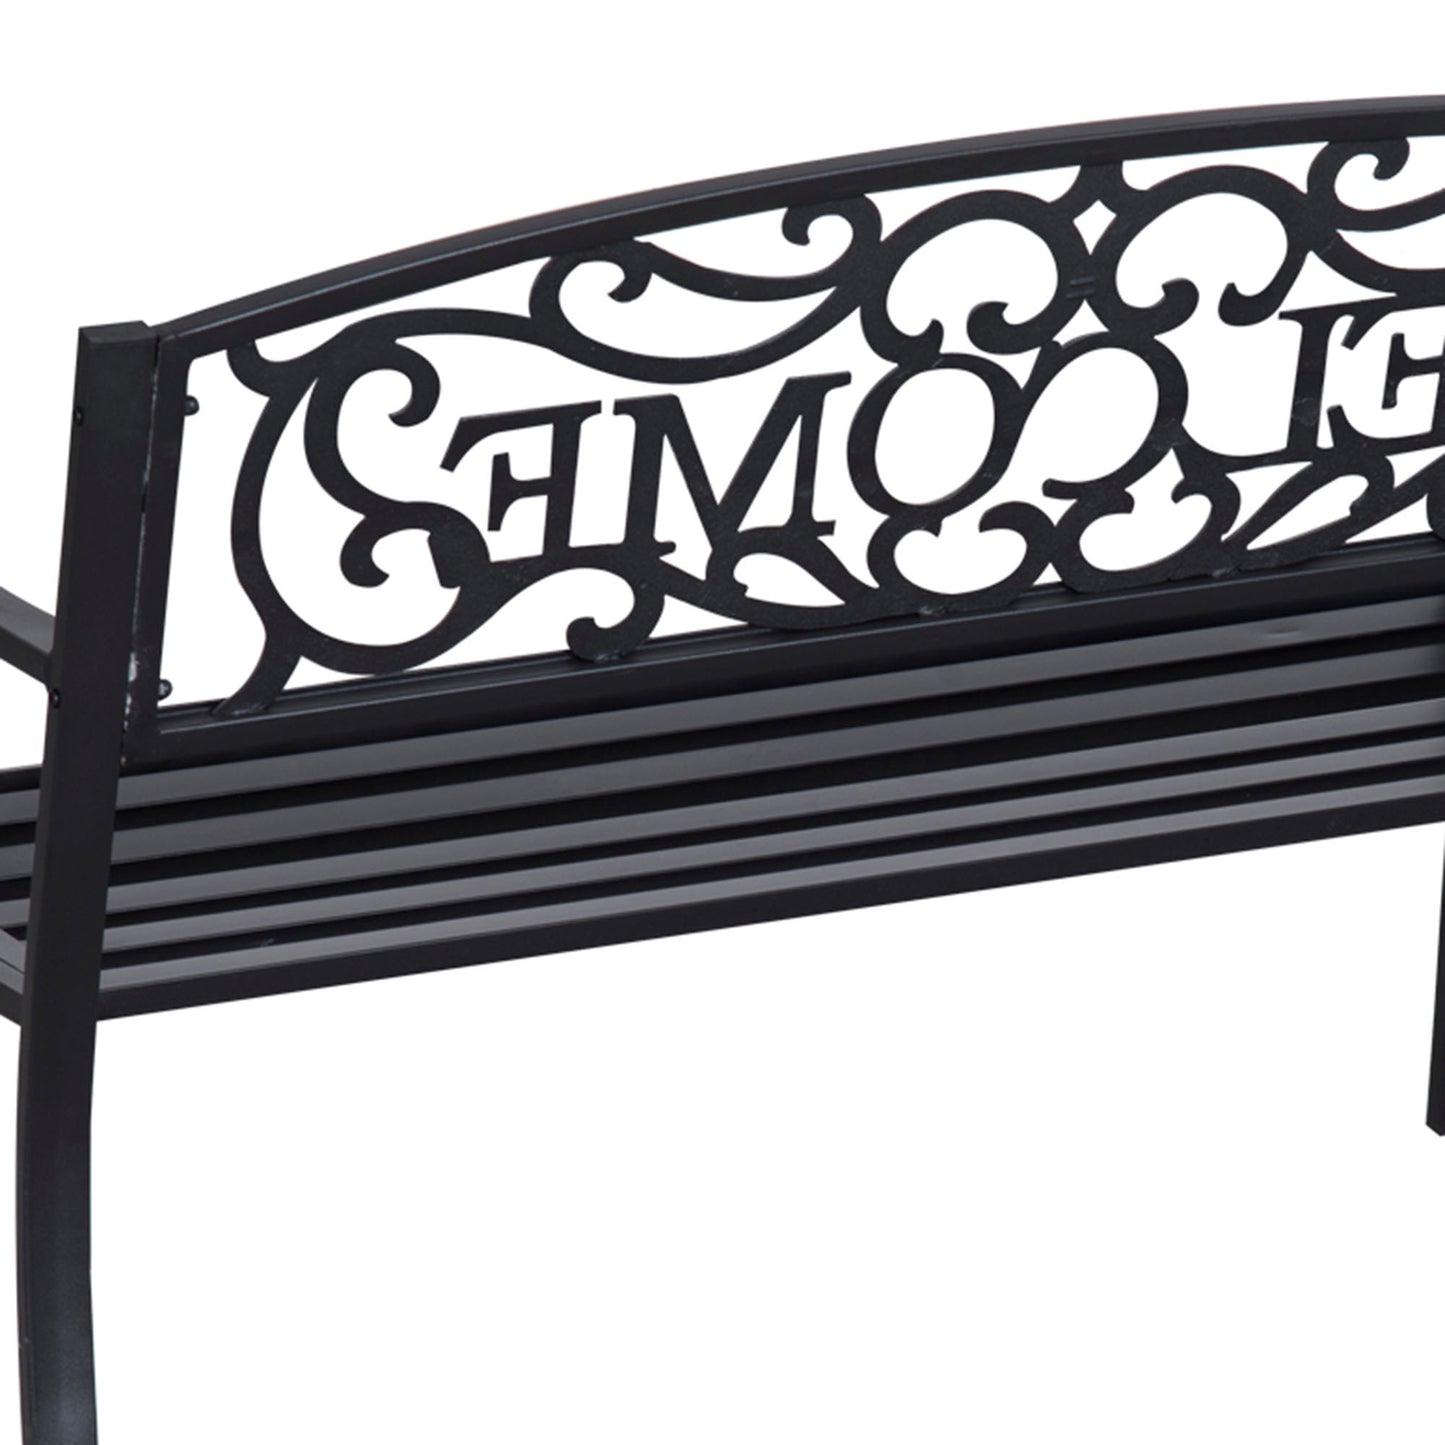 Outsunny 126Lx60Wx85H cm Steel Bench-Black